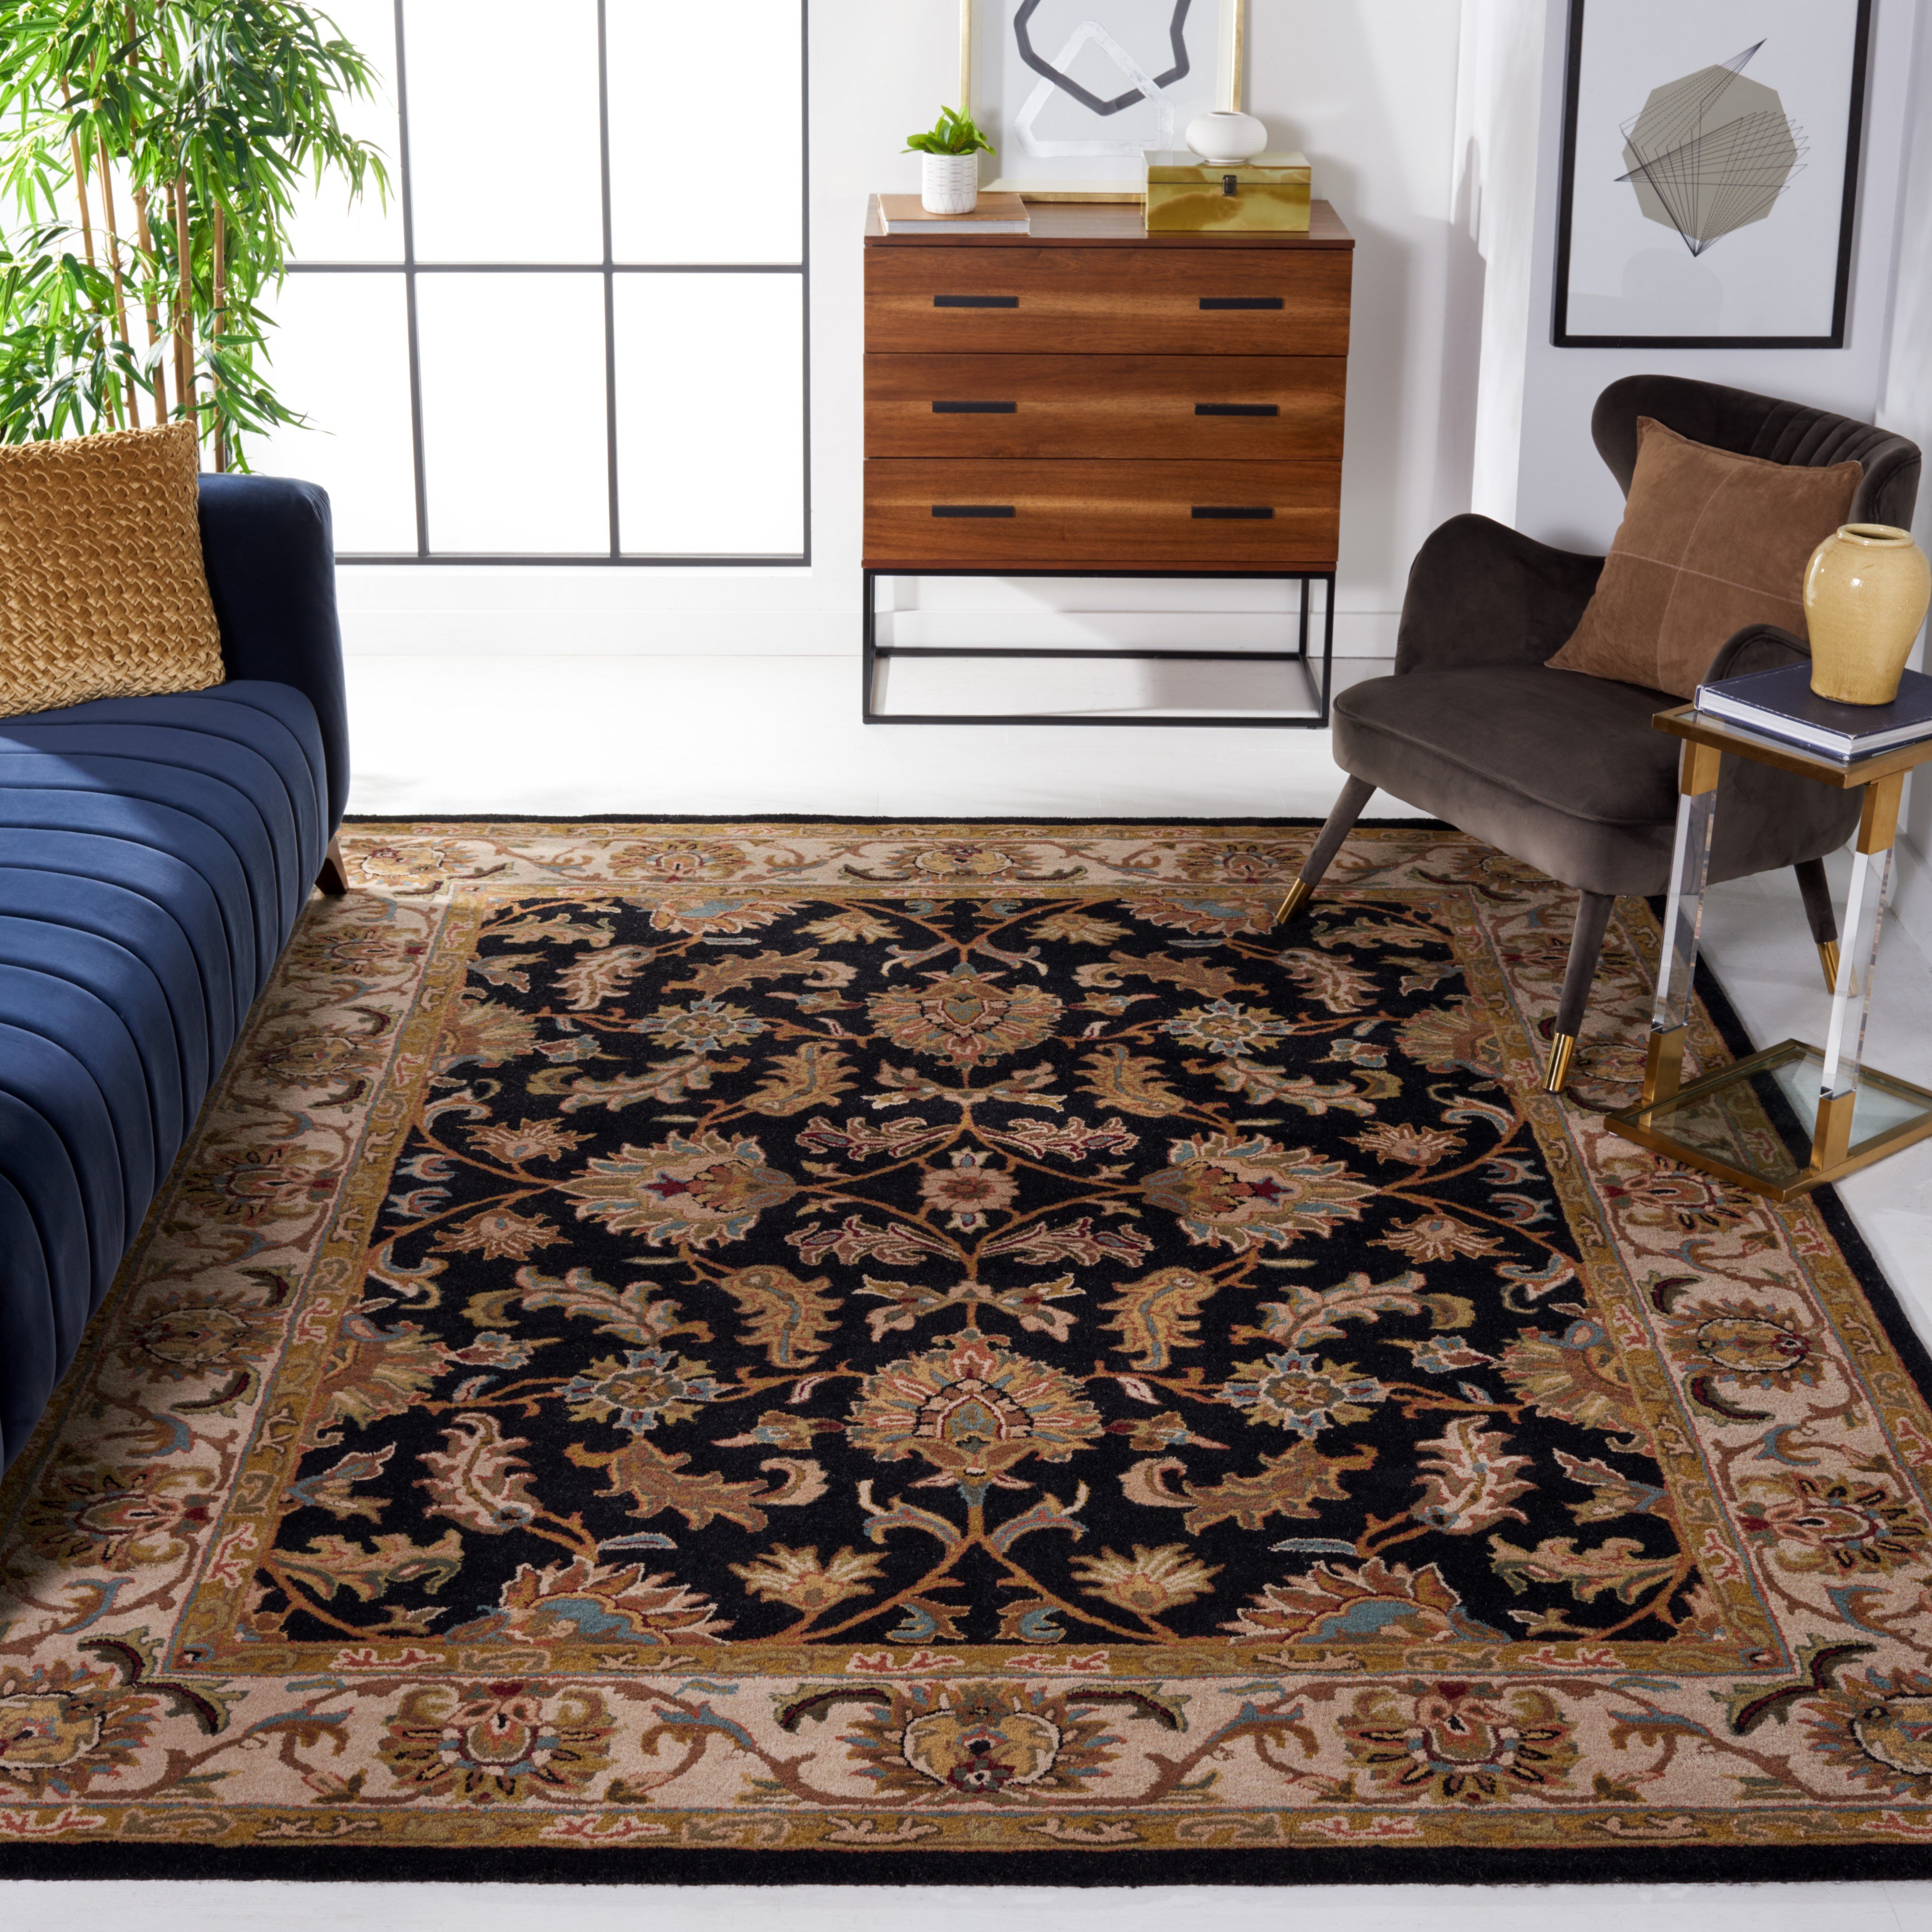 Safavieh Heritage Collection HG-628, Safavieh Area Rugs Rugs Direct